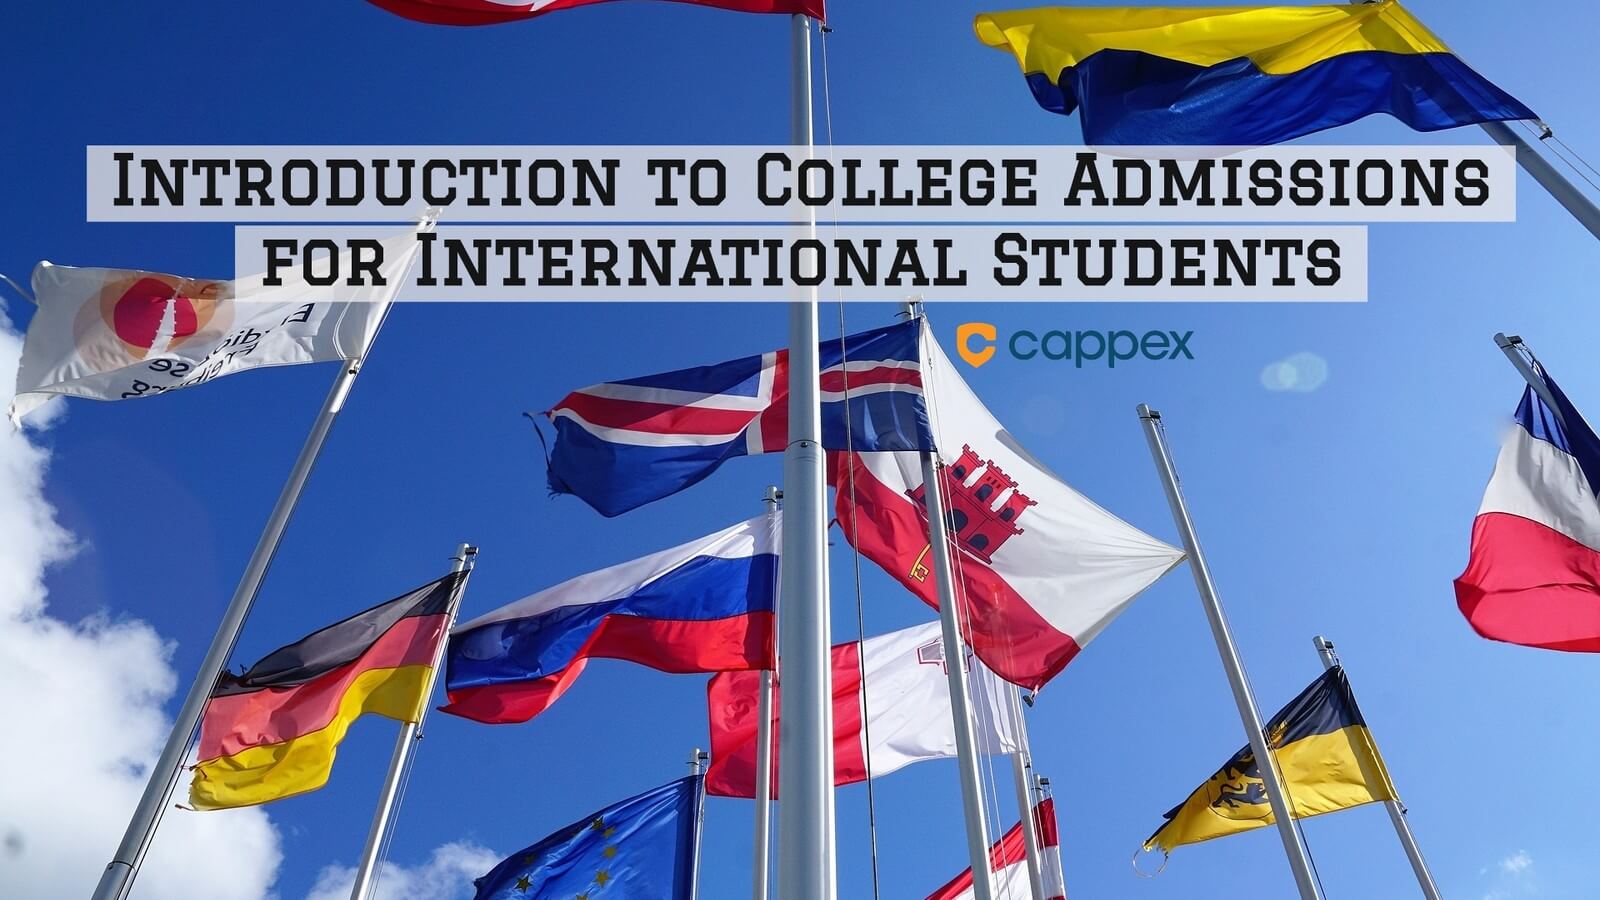 Introduction to College Admissions for International Students